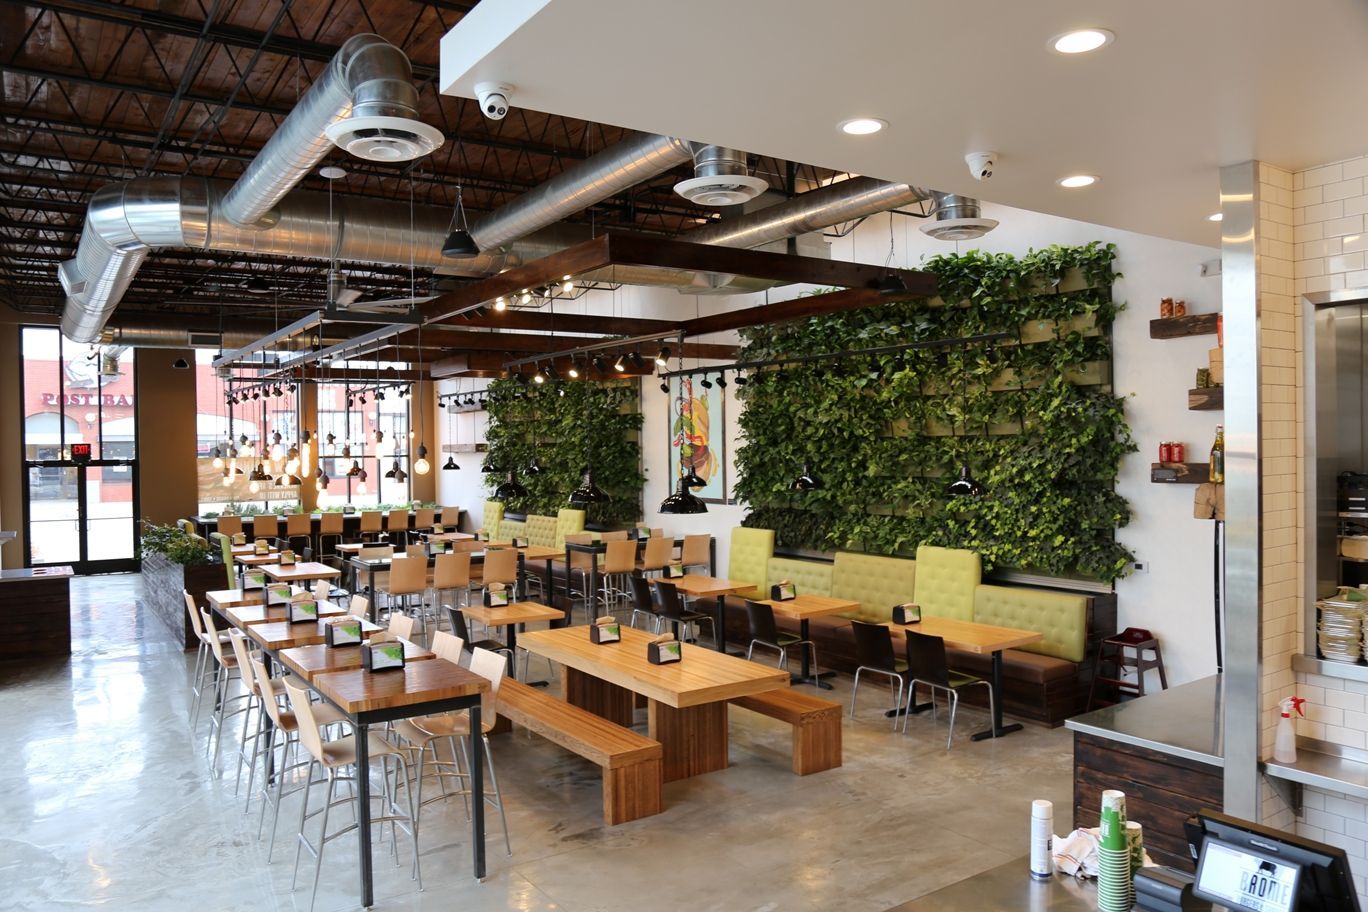 Brome Burgers & Shakes Welcomes with Green Wall | Commercial